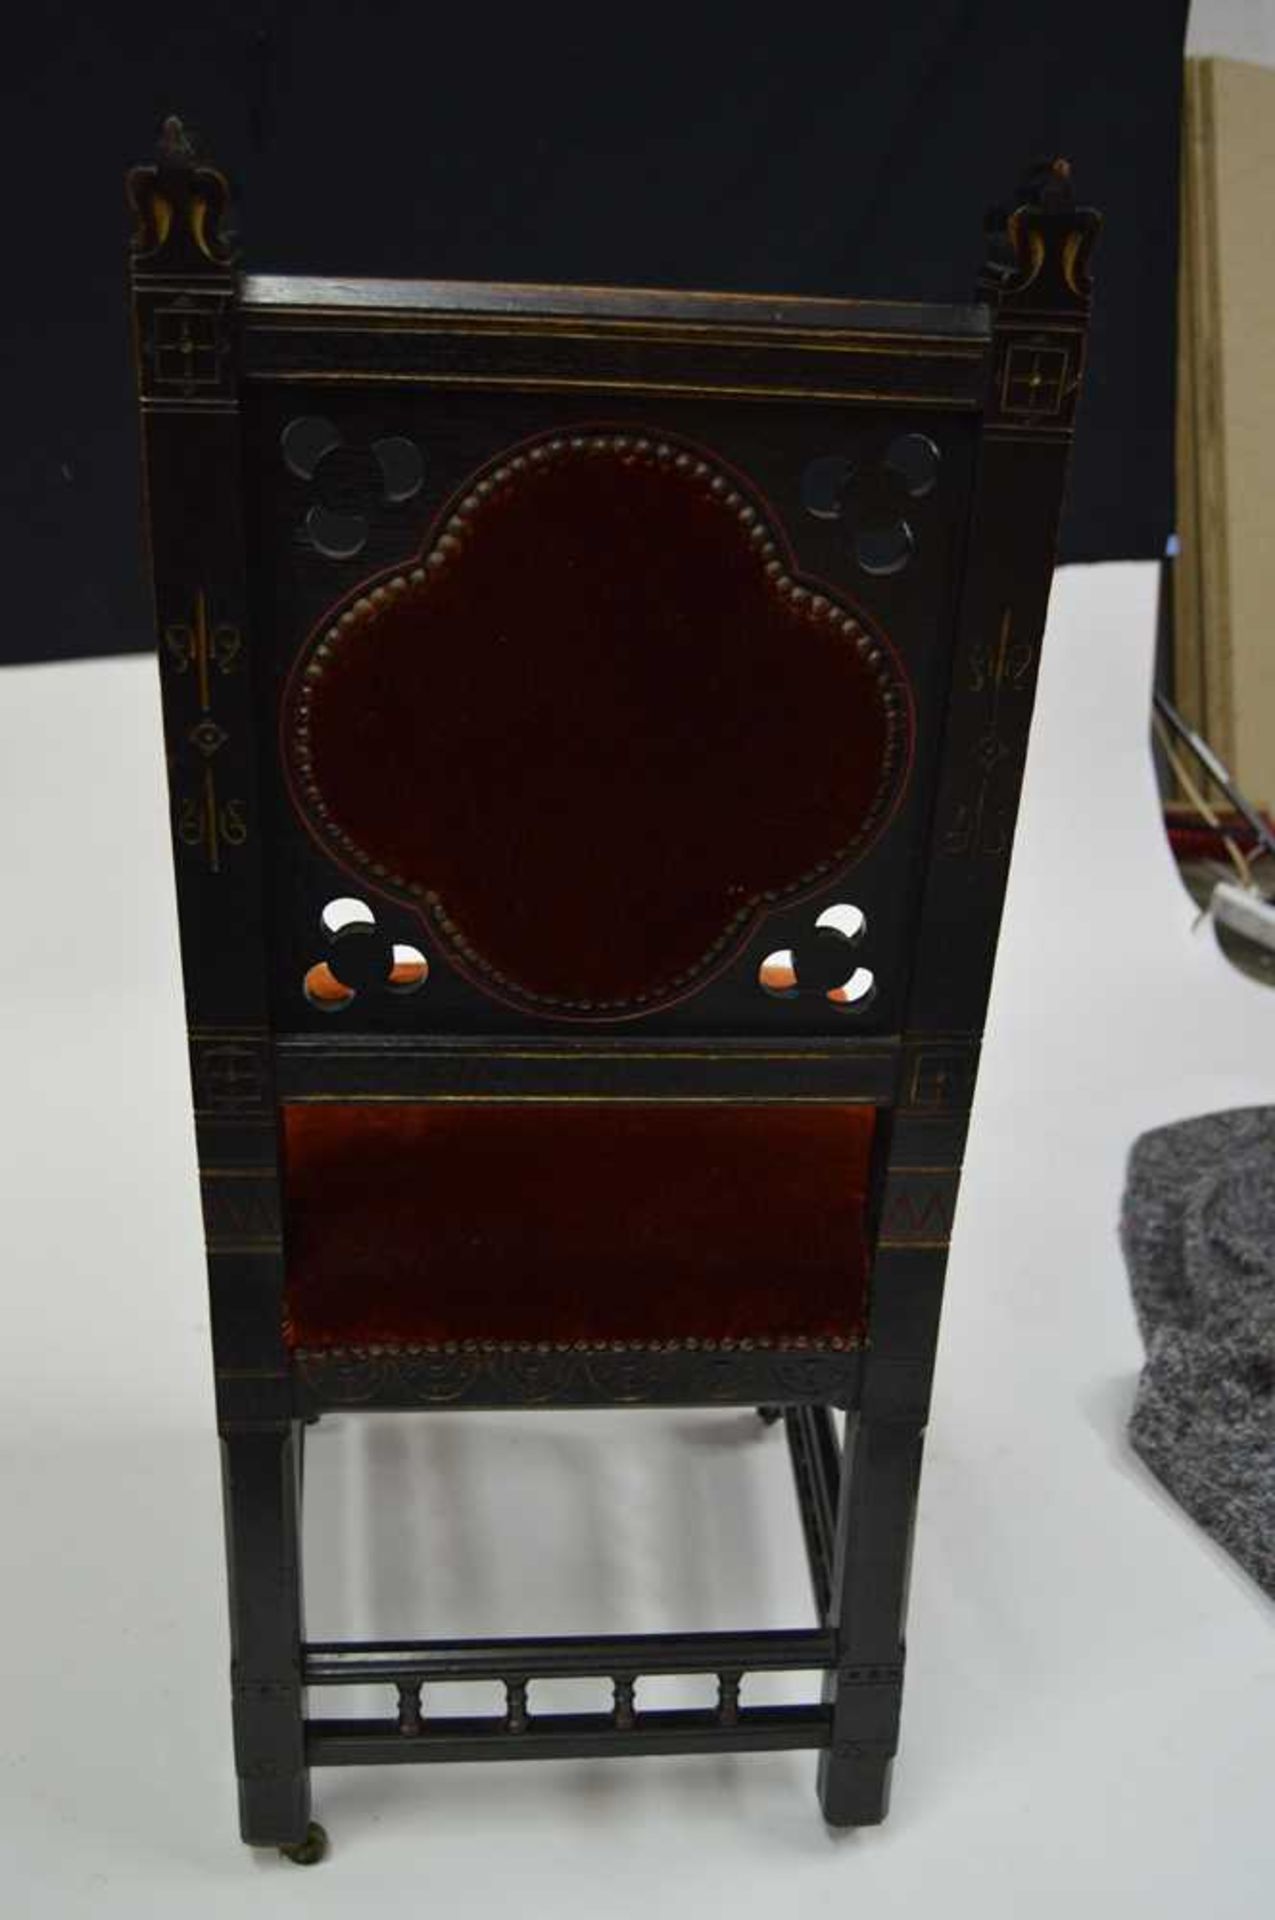 JOHN MOYR SMITH (1839-1912) (ATTRIBUTED DESIGNER) FOR COX & SON, LONDON GOTHIC REVIVAL SIDE CHAIR, - Image 7 of 18